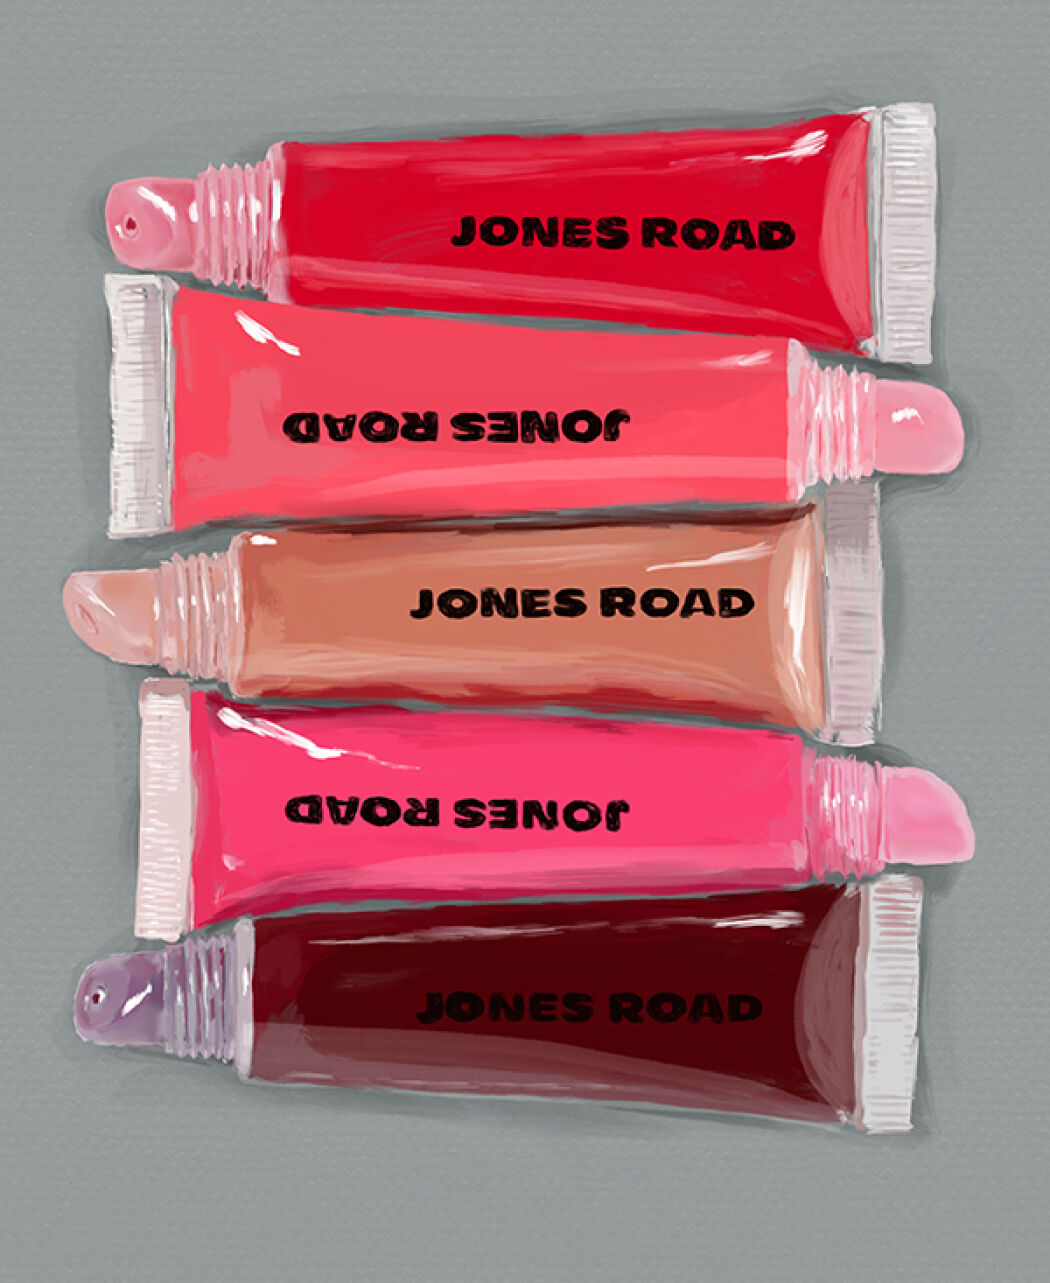 Branding campaign illustrations for the beauty brand Jones Road Beauty, by Christina Gliha